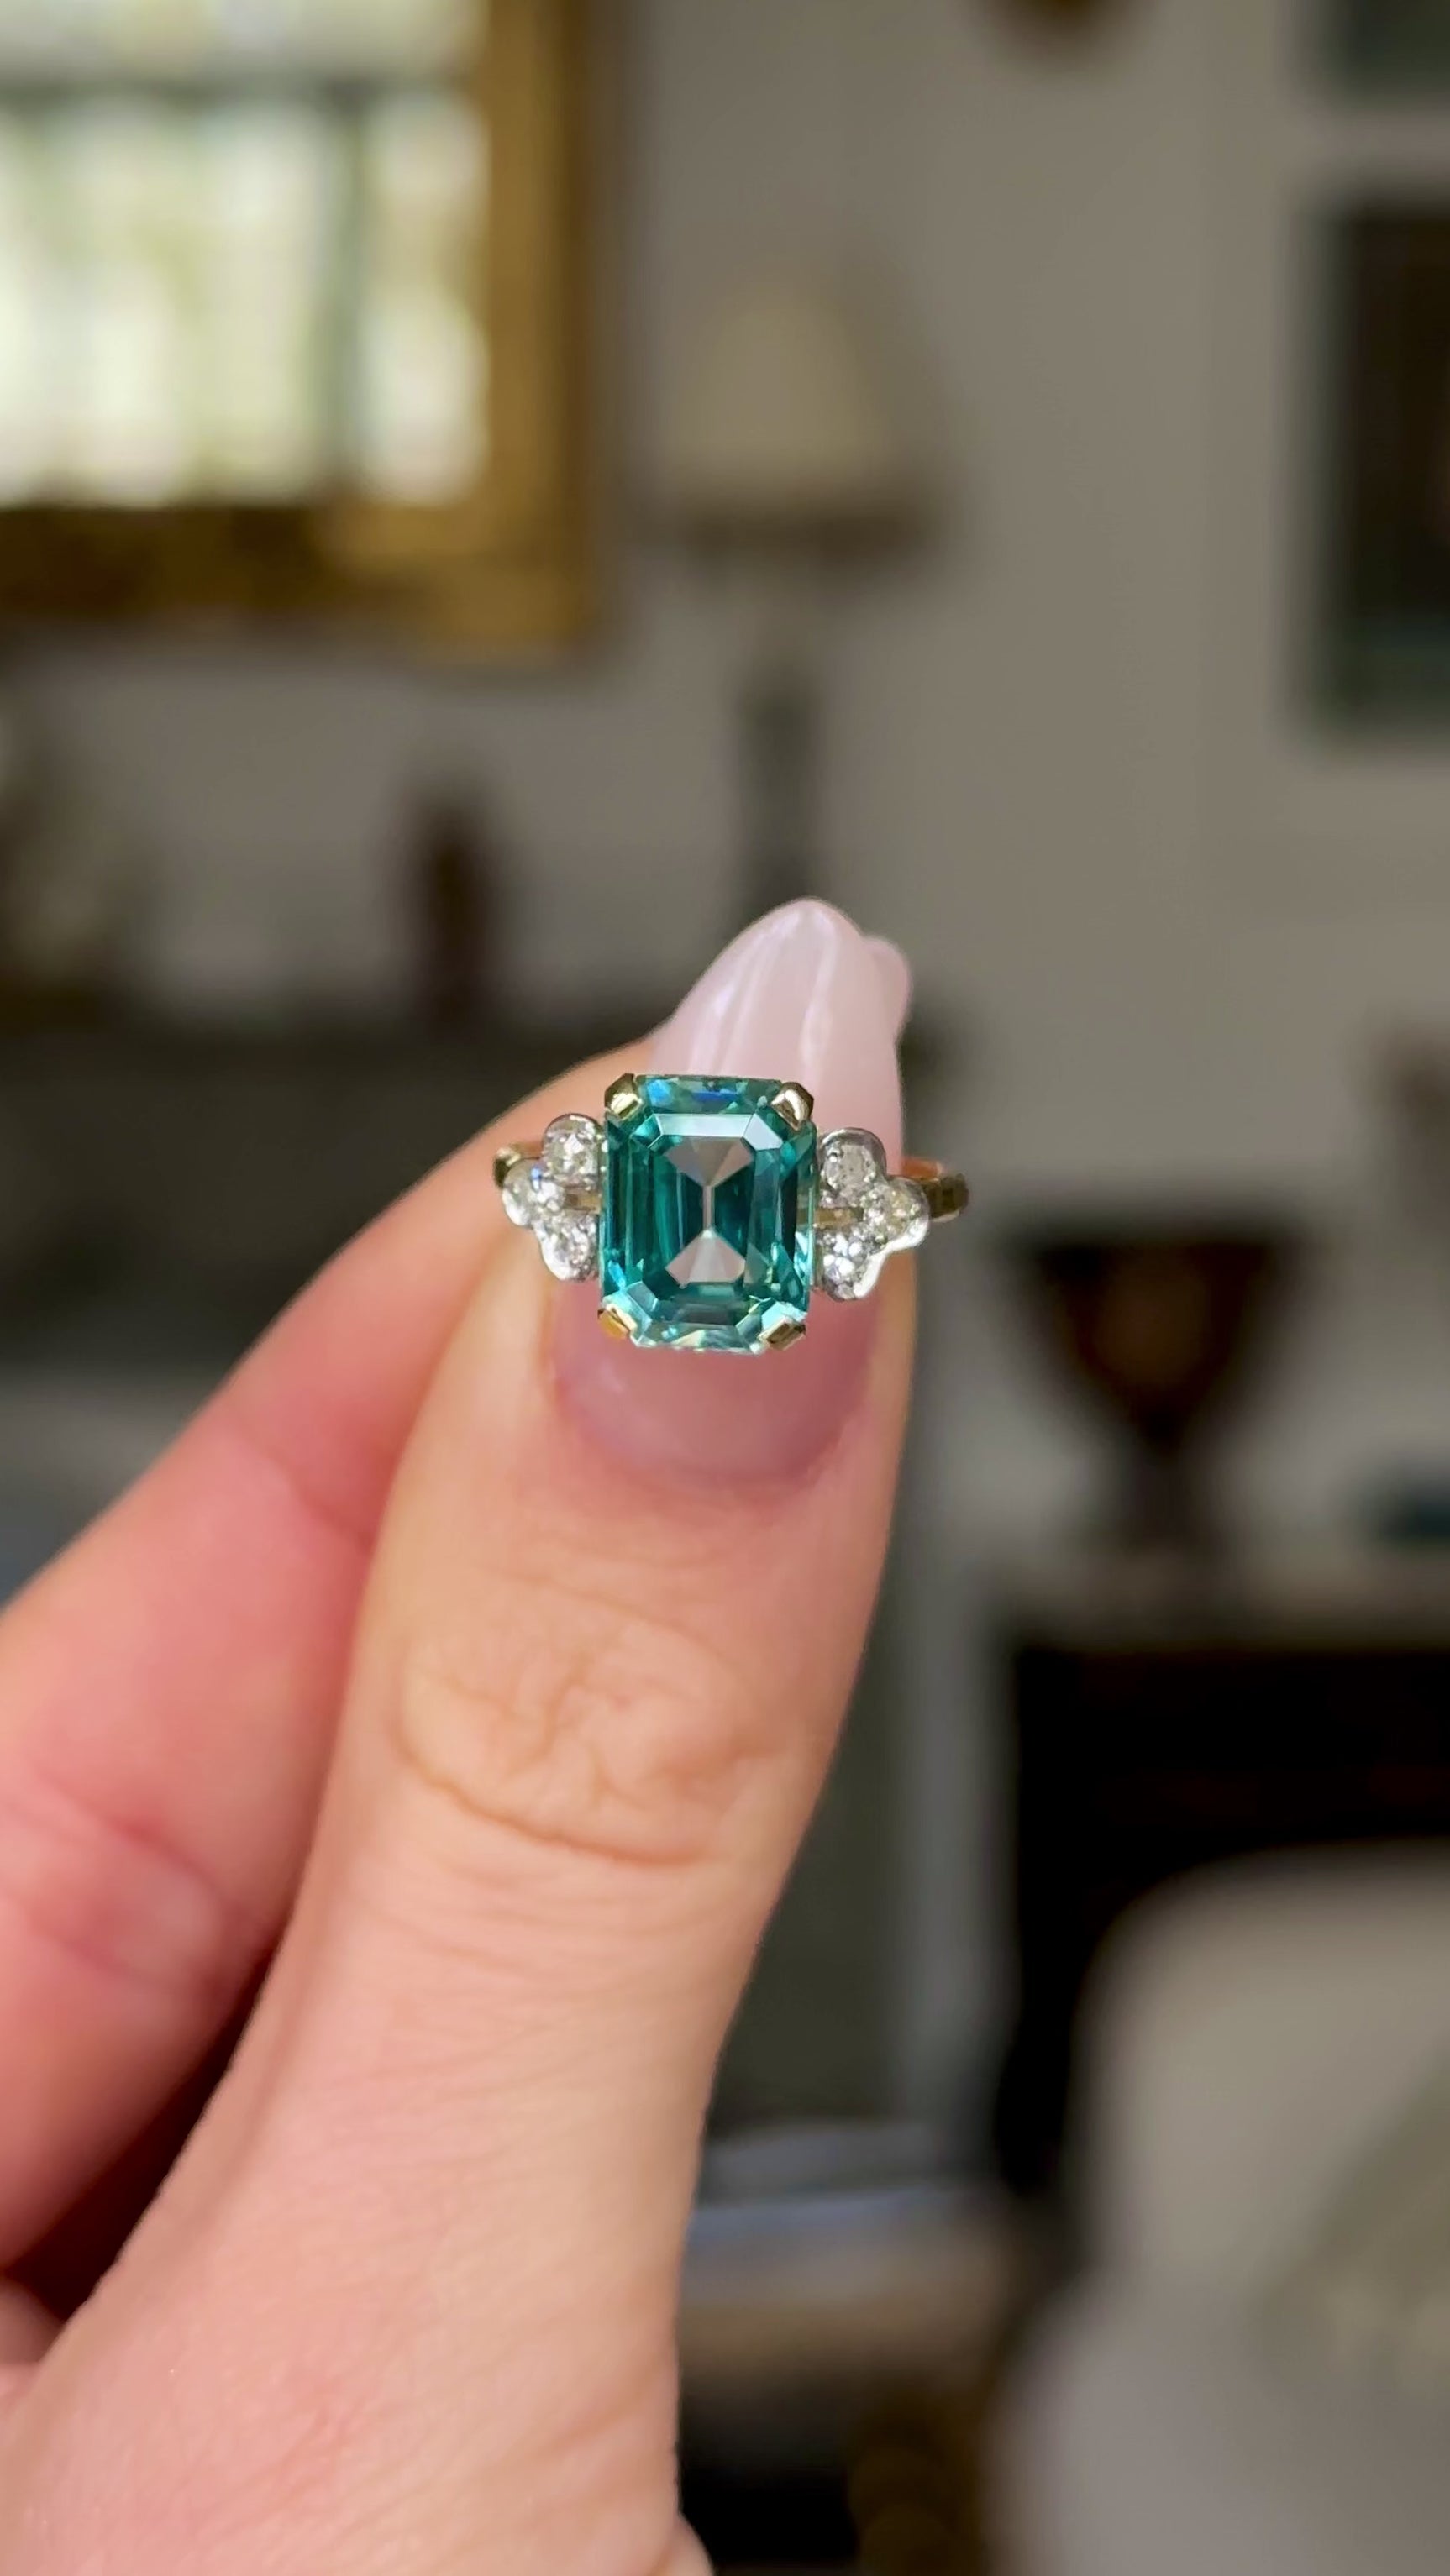 Vintage, Art Deco Aquamarine and Diamond Ring, 18ct White Gold held in fingers and rotated to give perspective.